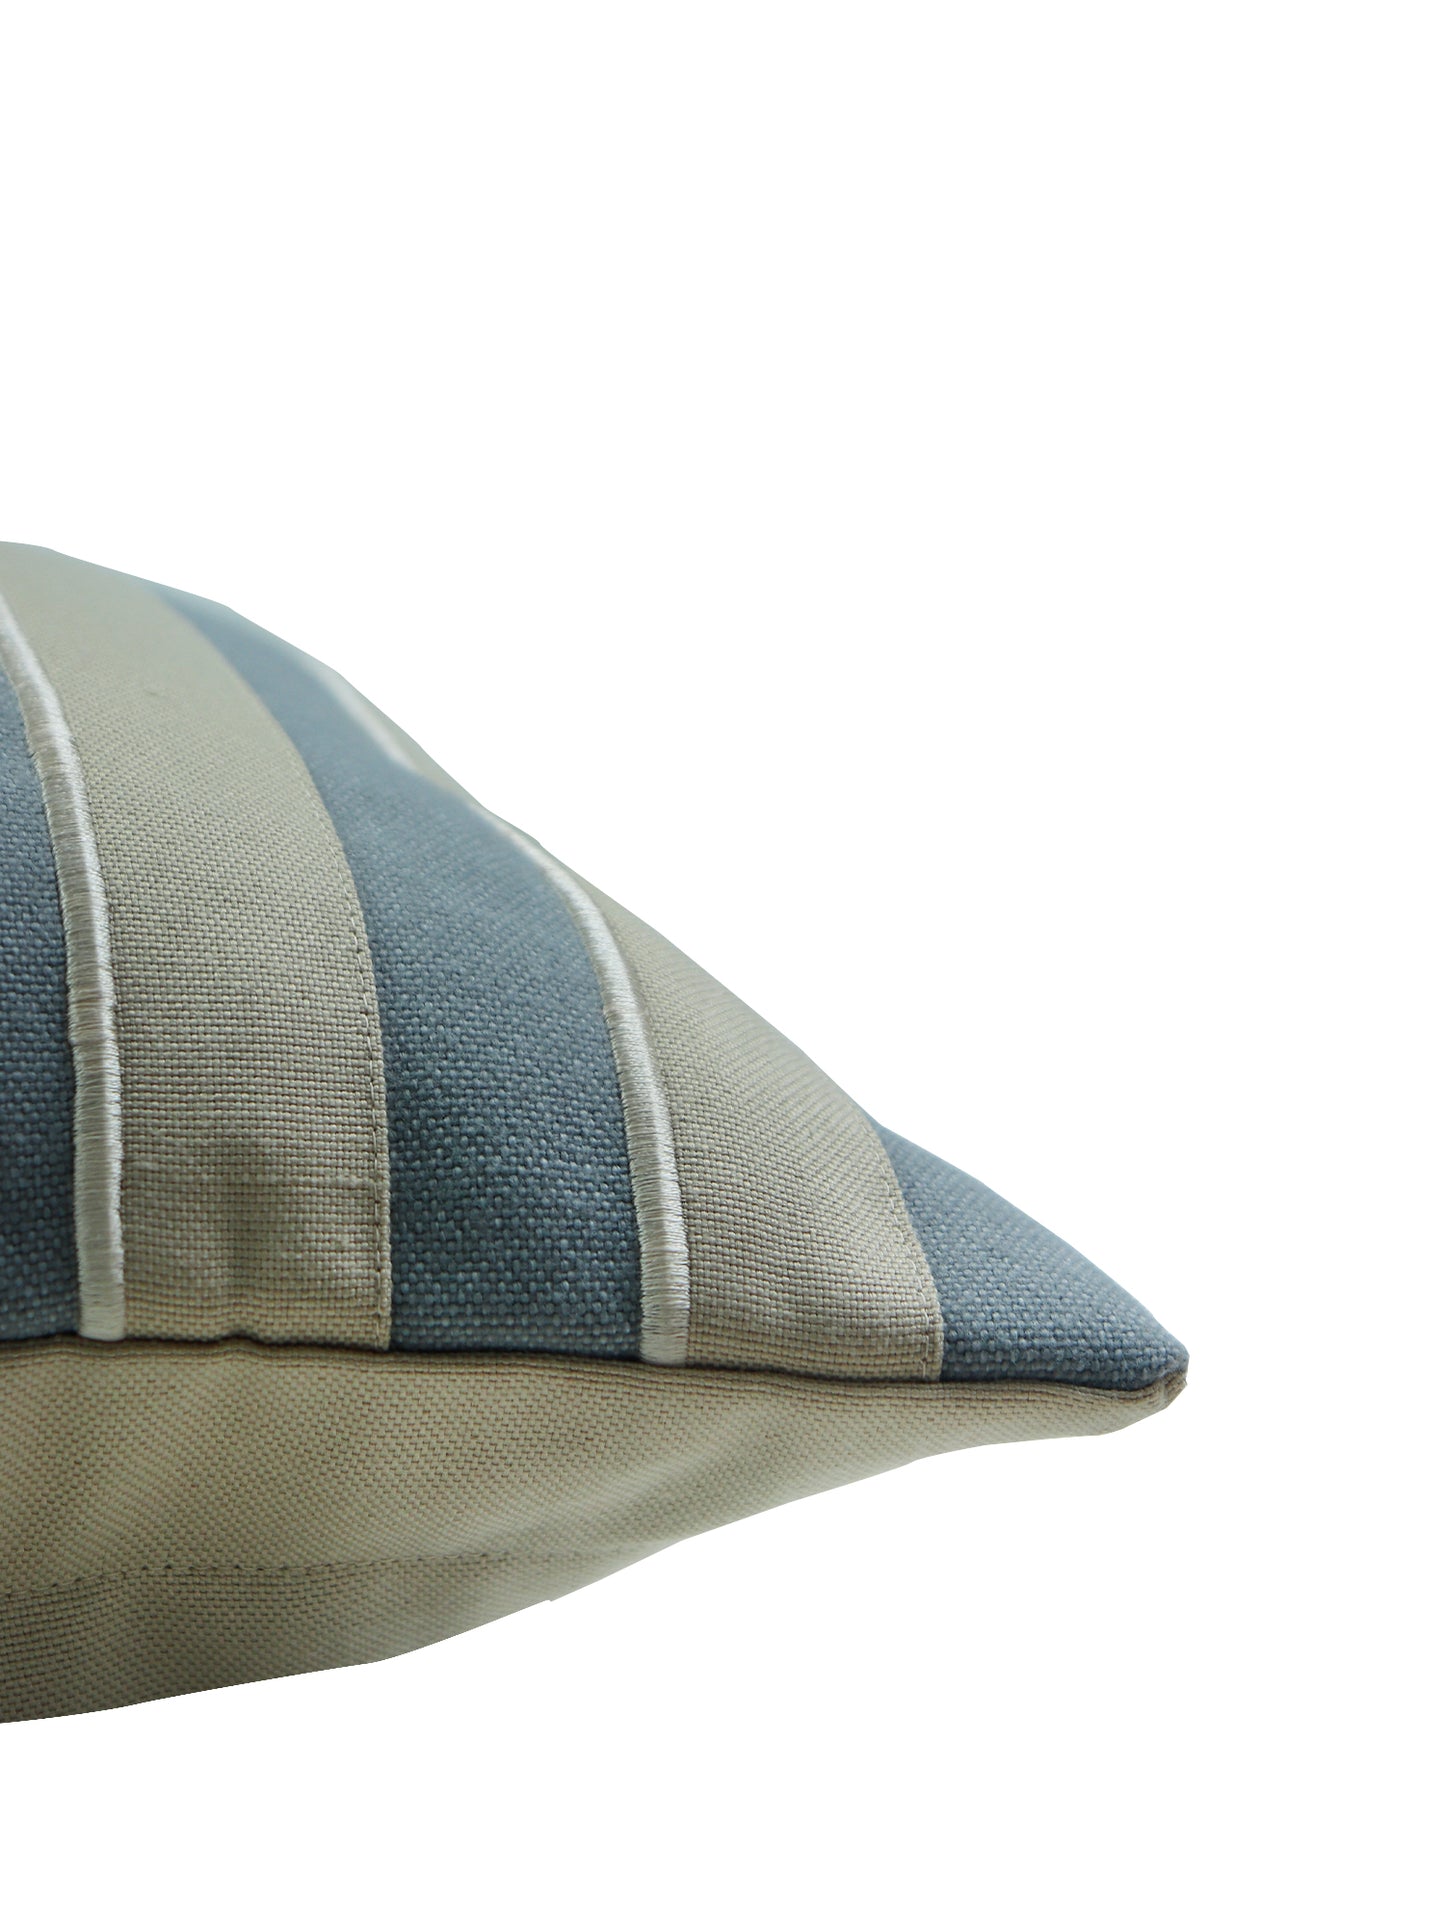 Embroidered Cushion Cover with Striped Patchwork Beige Grey - 12" X 22"